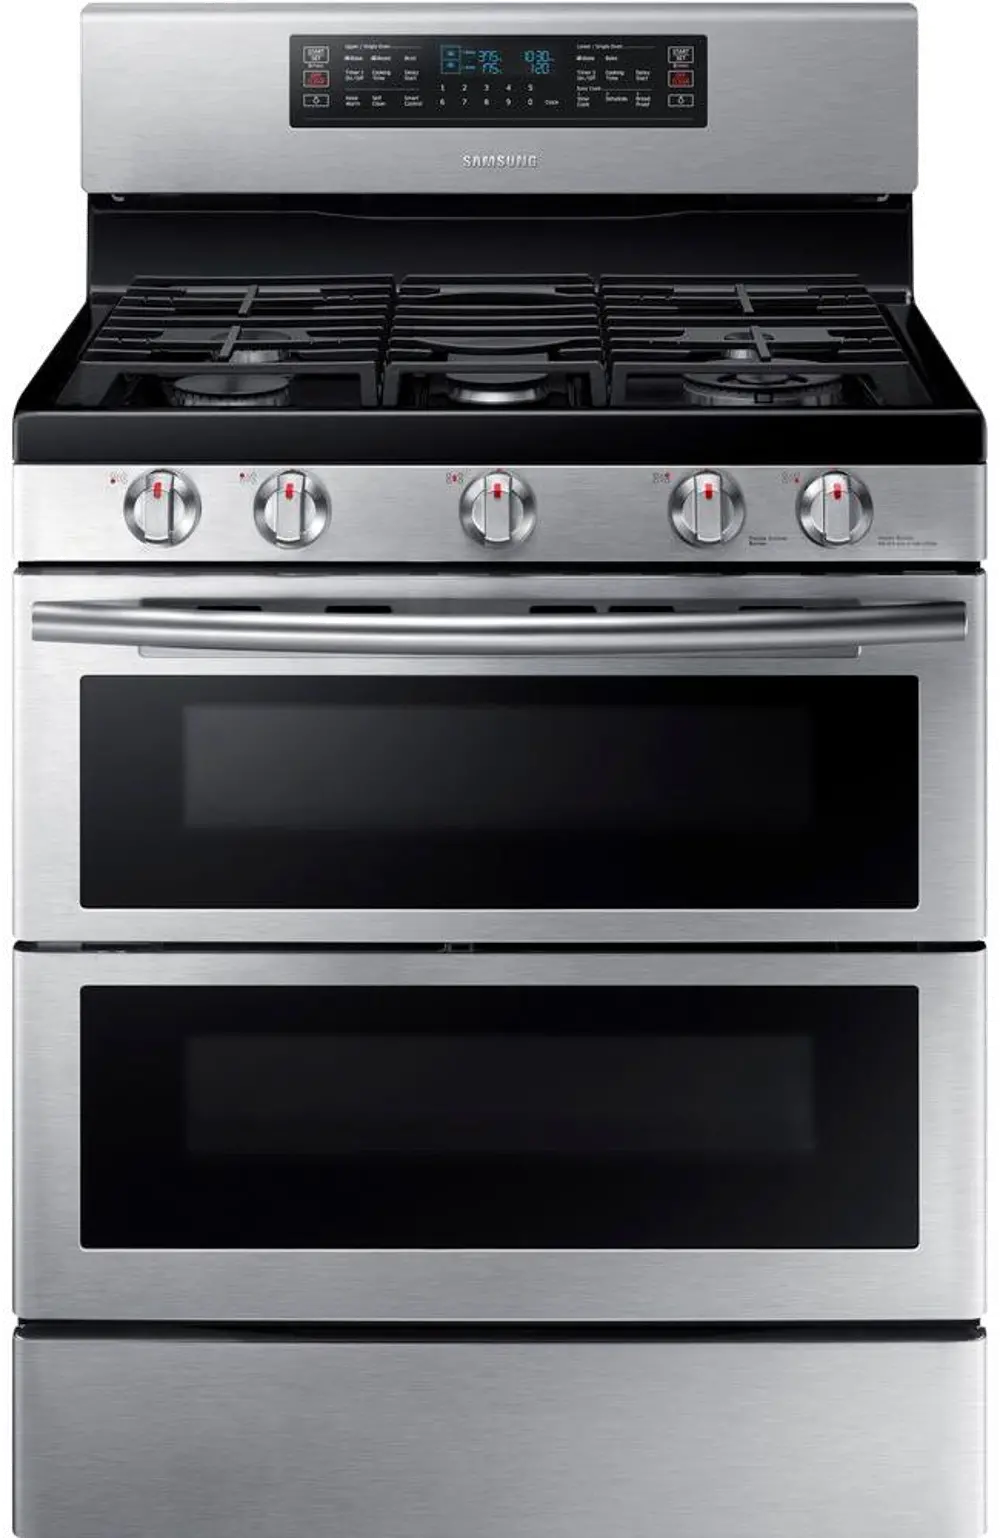 NX58K7850SS Samsung 5.8 cu. ft. Double Oven Gas Slide-in Range - Stainless Steel-1